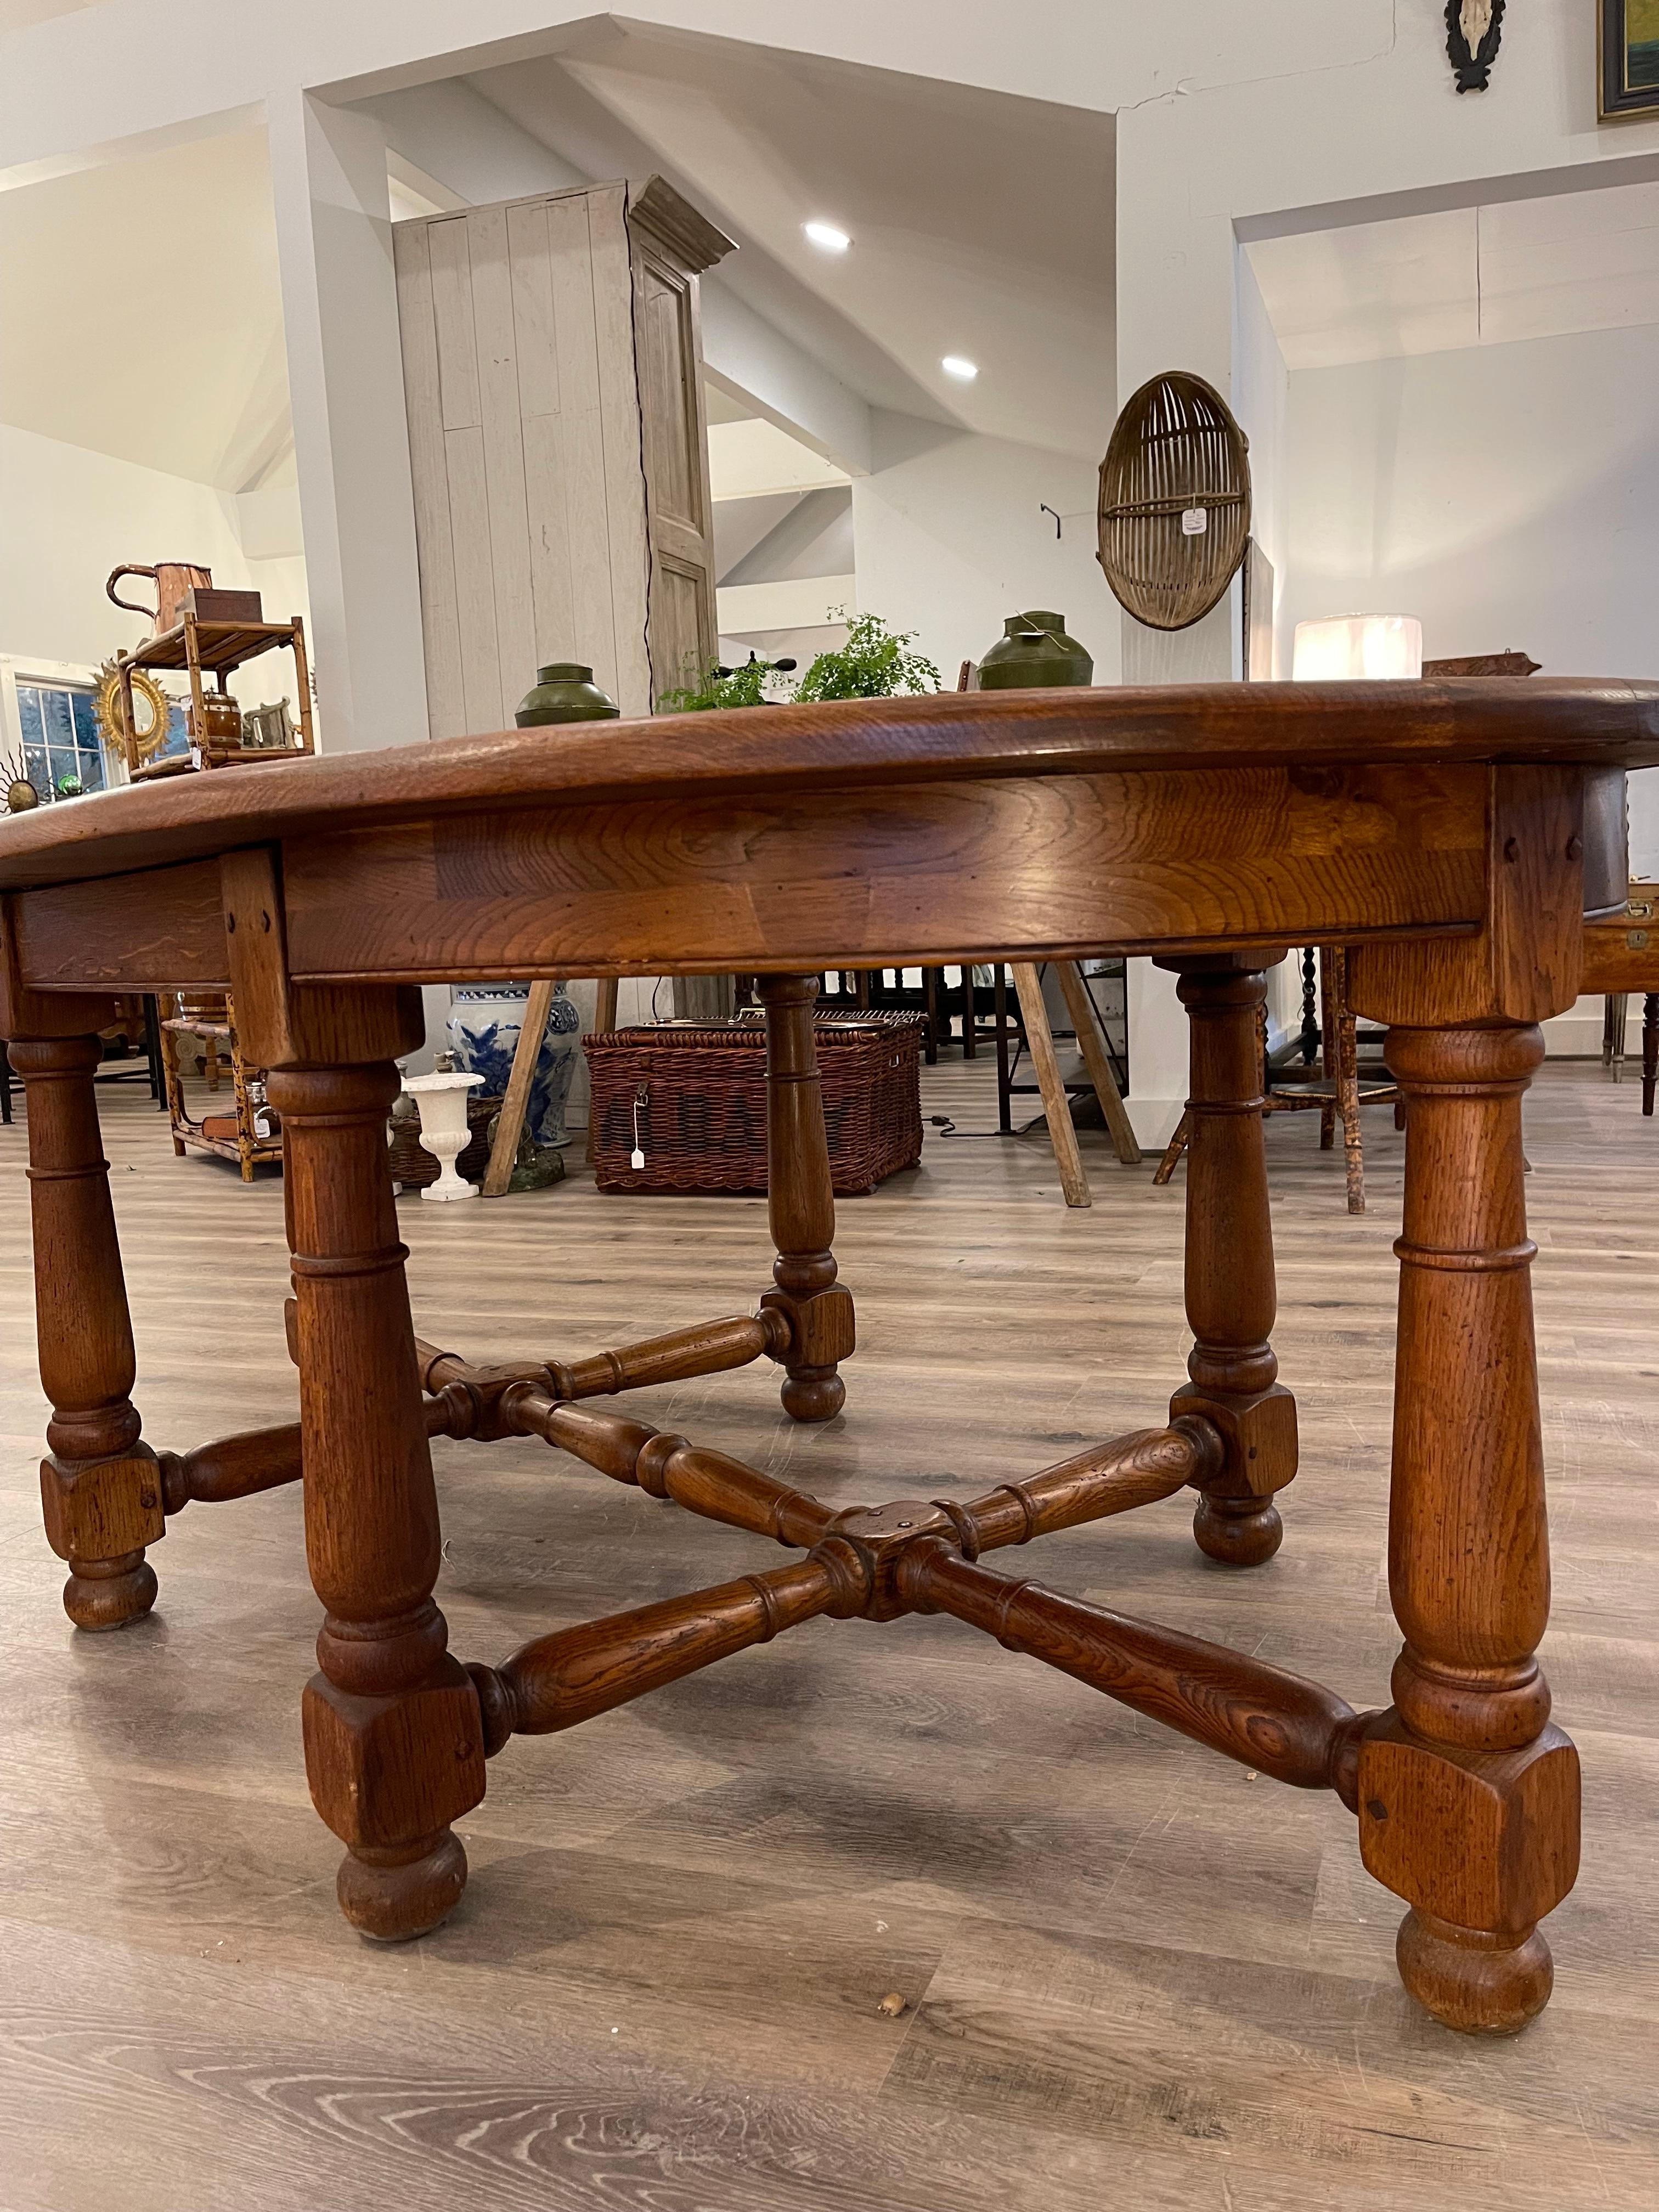 This is a gorgeous antique French dining table! The oval shape of this piece is very unique, as it is not a common design among antique tables. The way the wood was pieced together makes for a beautiful design in the top with long triangular pieces